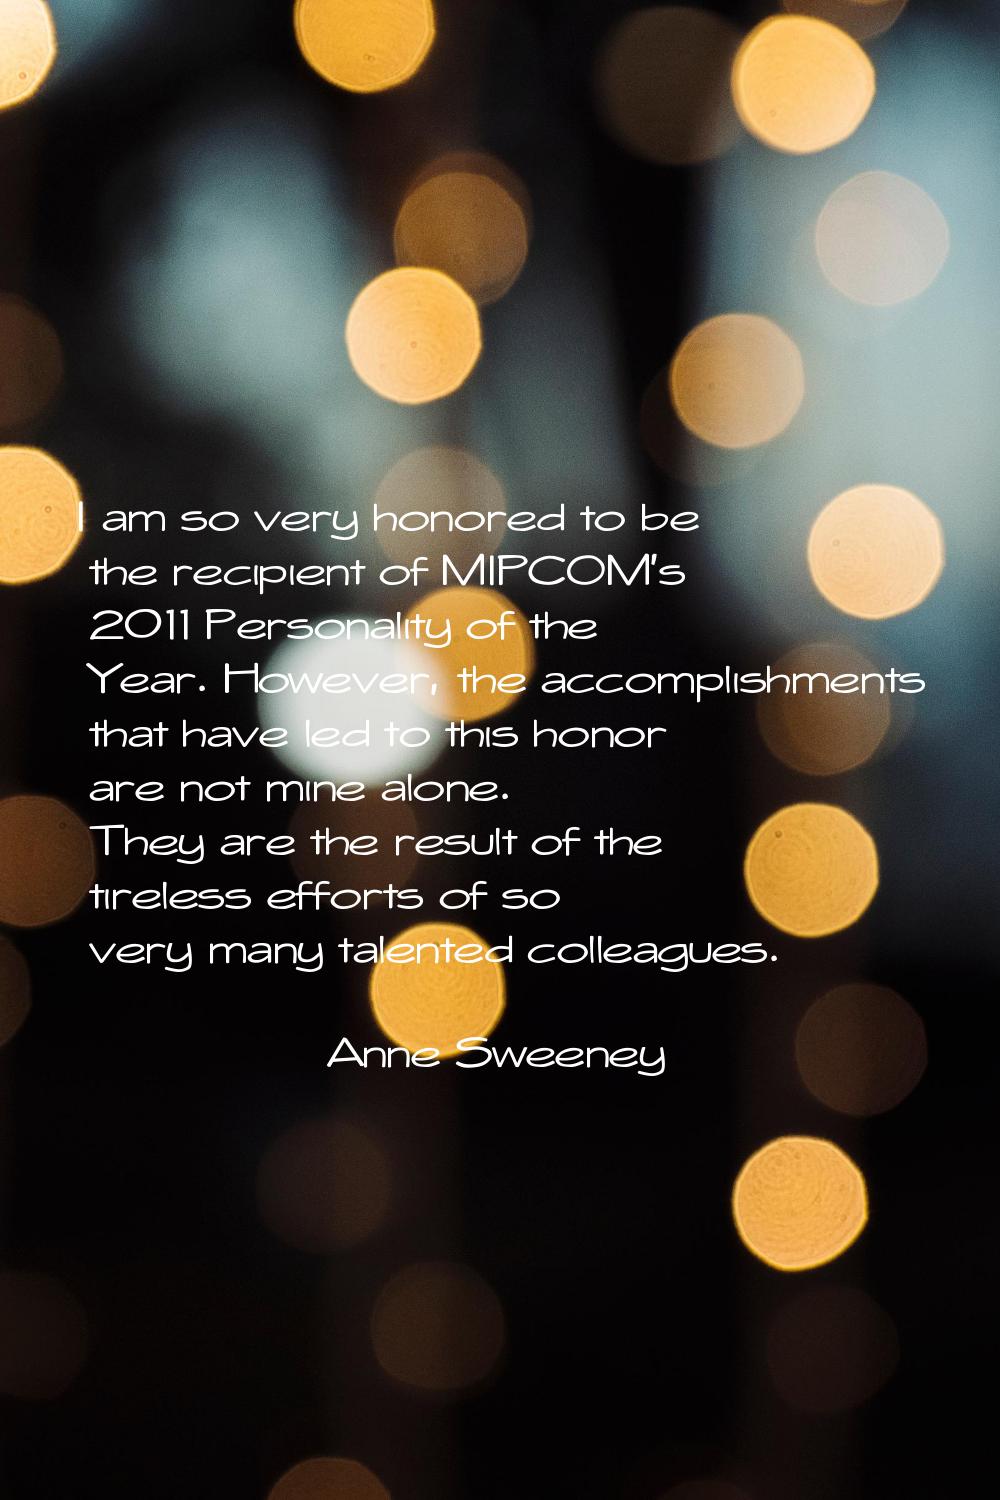 I am so very honored to be the recipient of MIPCOM's 2011 Personality of the Year. However, the acc